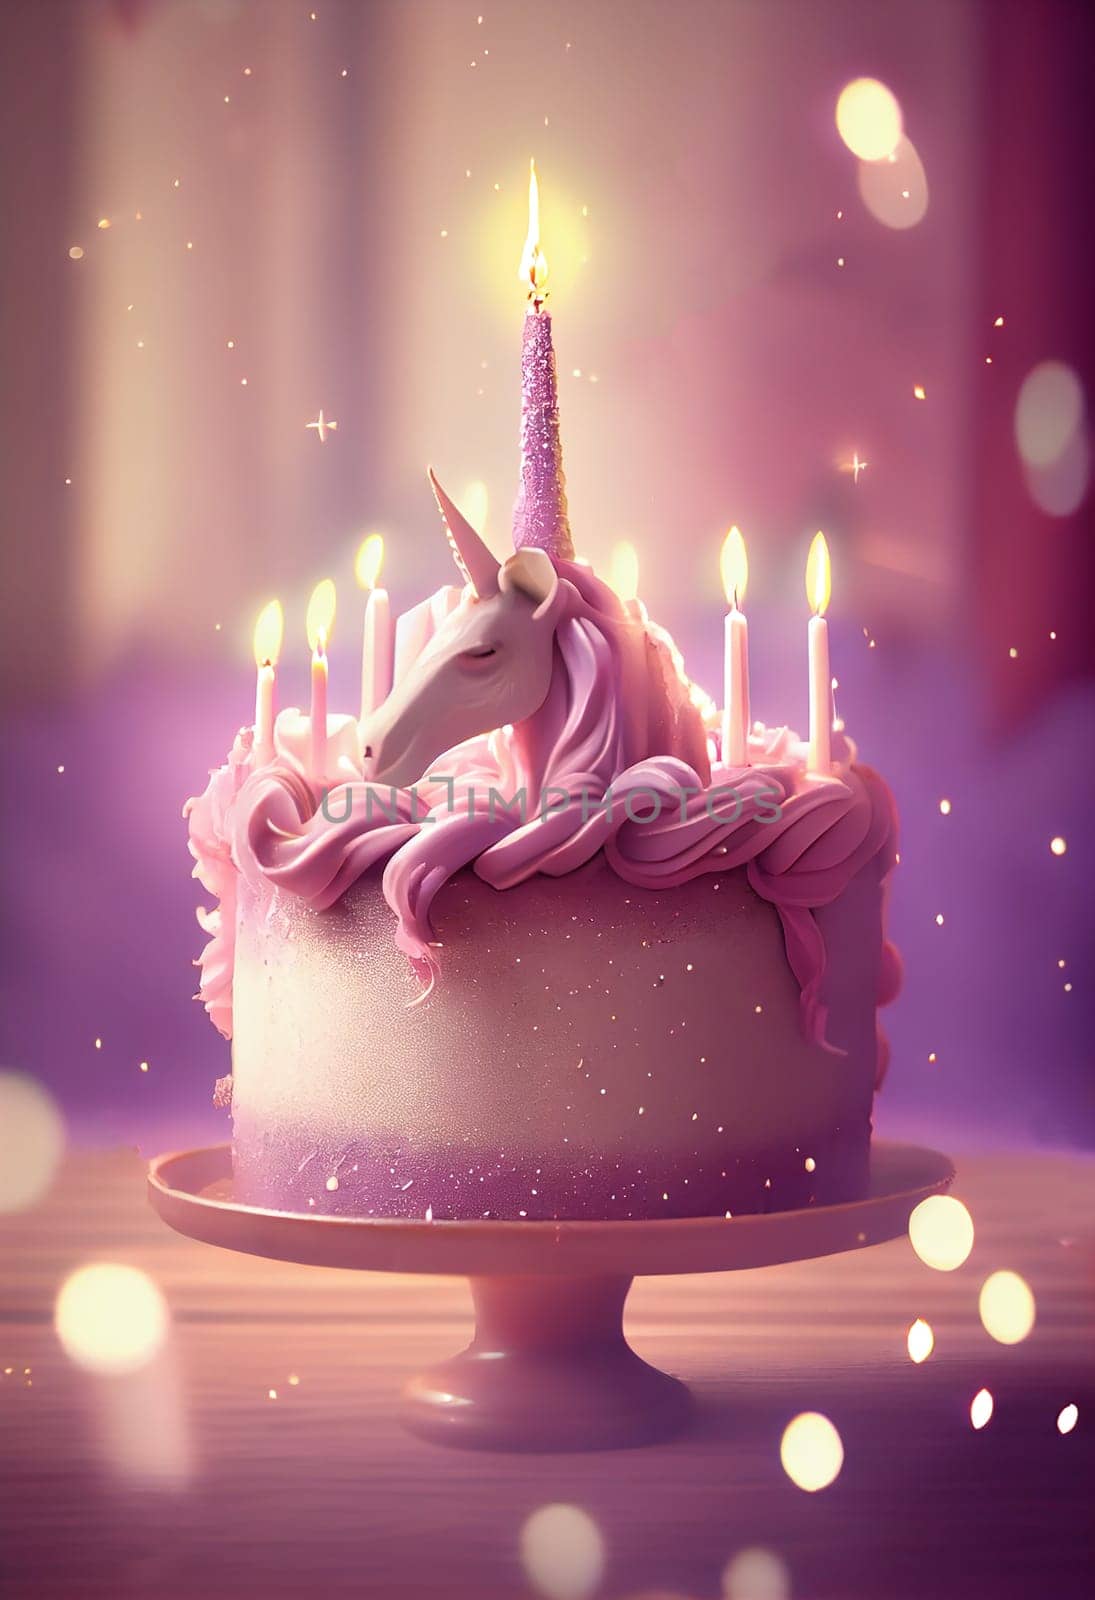 Unicorn cake design with pink frosting with burning candle and sparkling bokeh lights, birthday, little girls concept by Annebel146